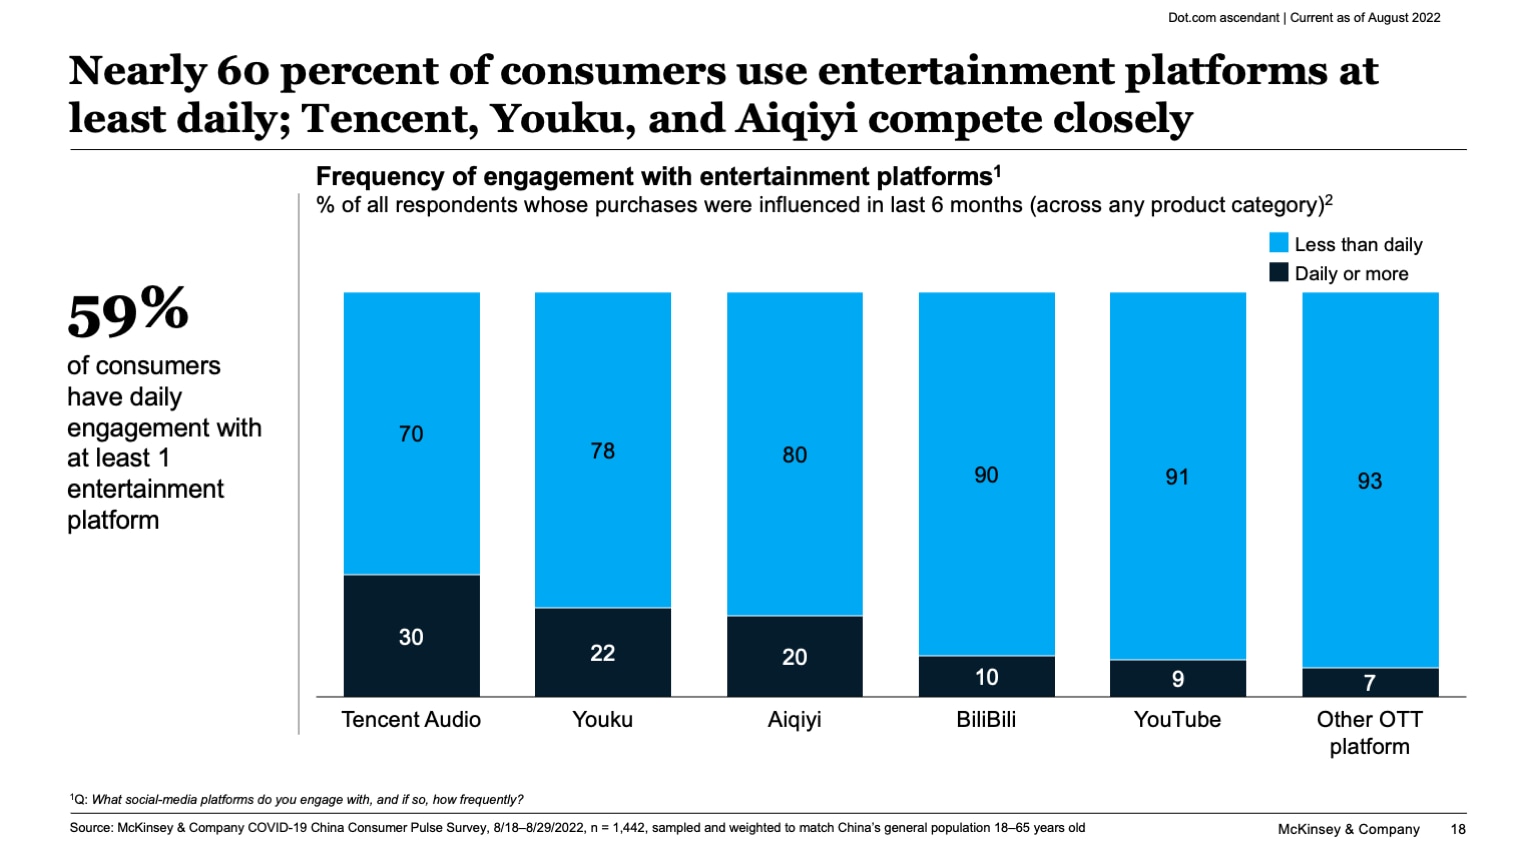 Nearly 60 percent of consumers use entertainment platforms at least daily; Tencent, Youku, and Aiqiyi compete closely